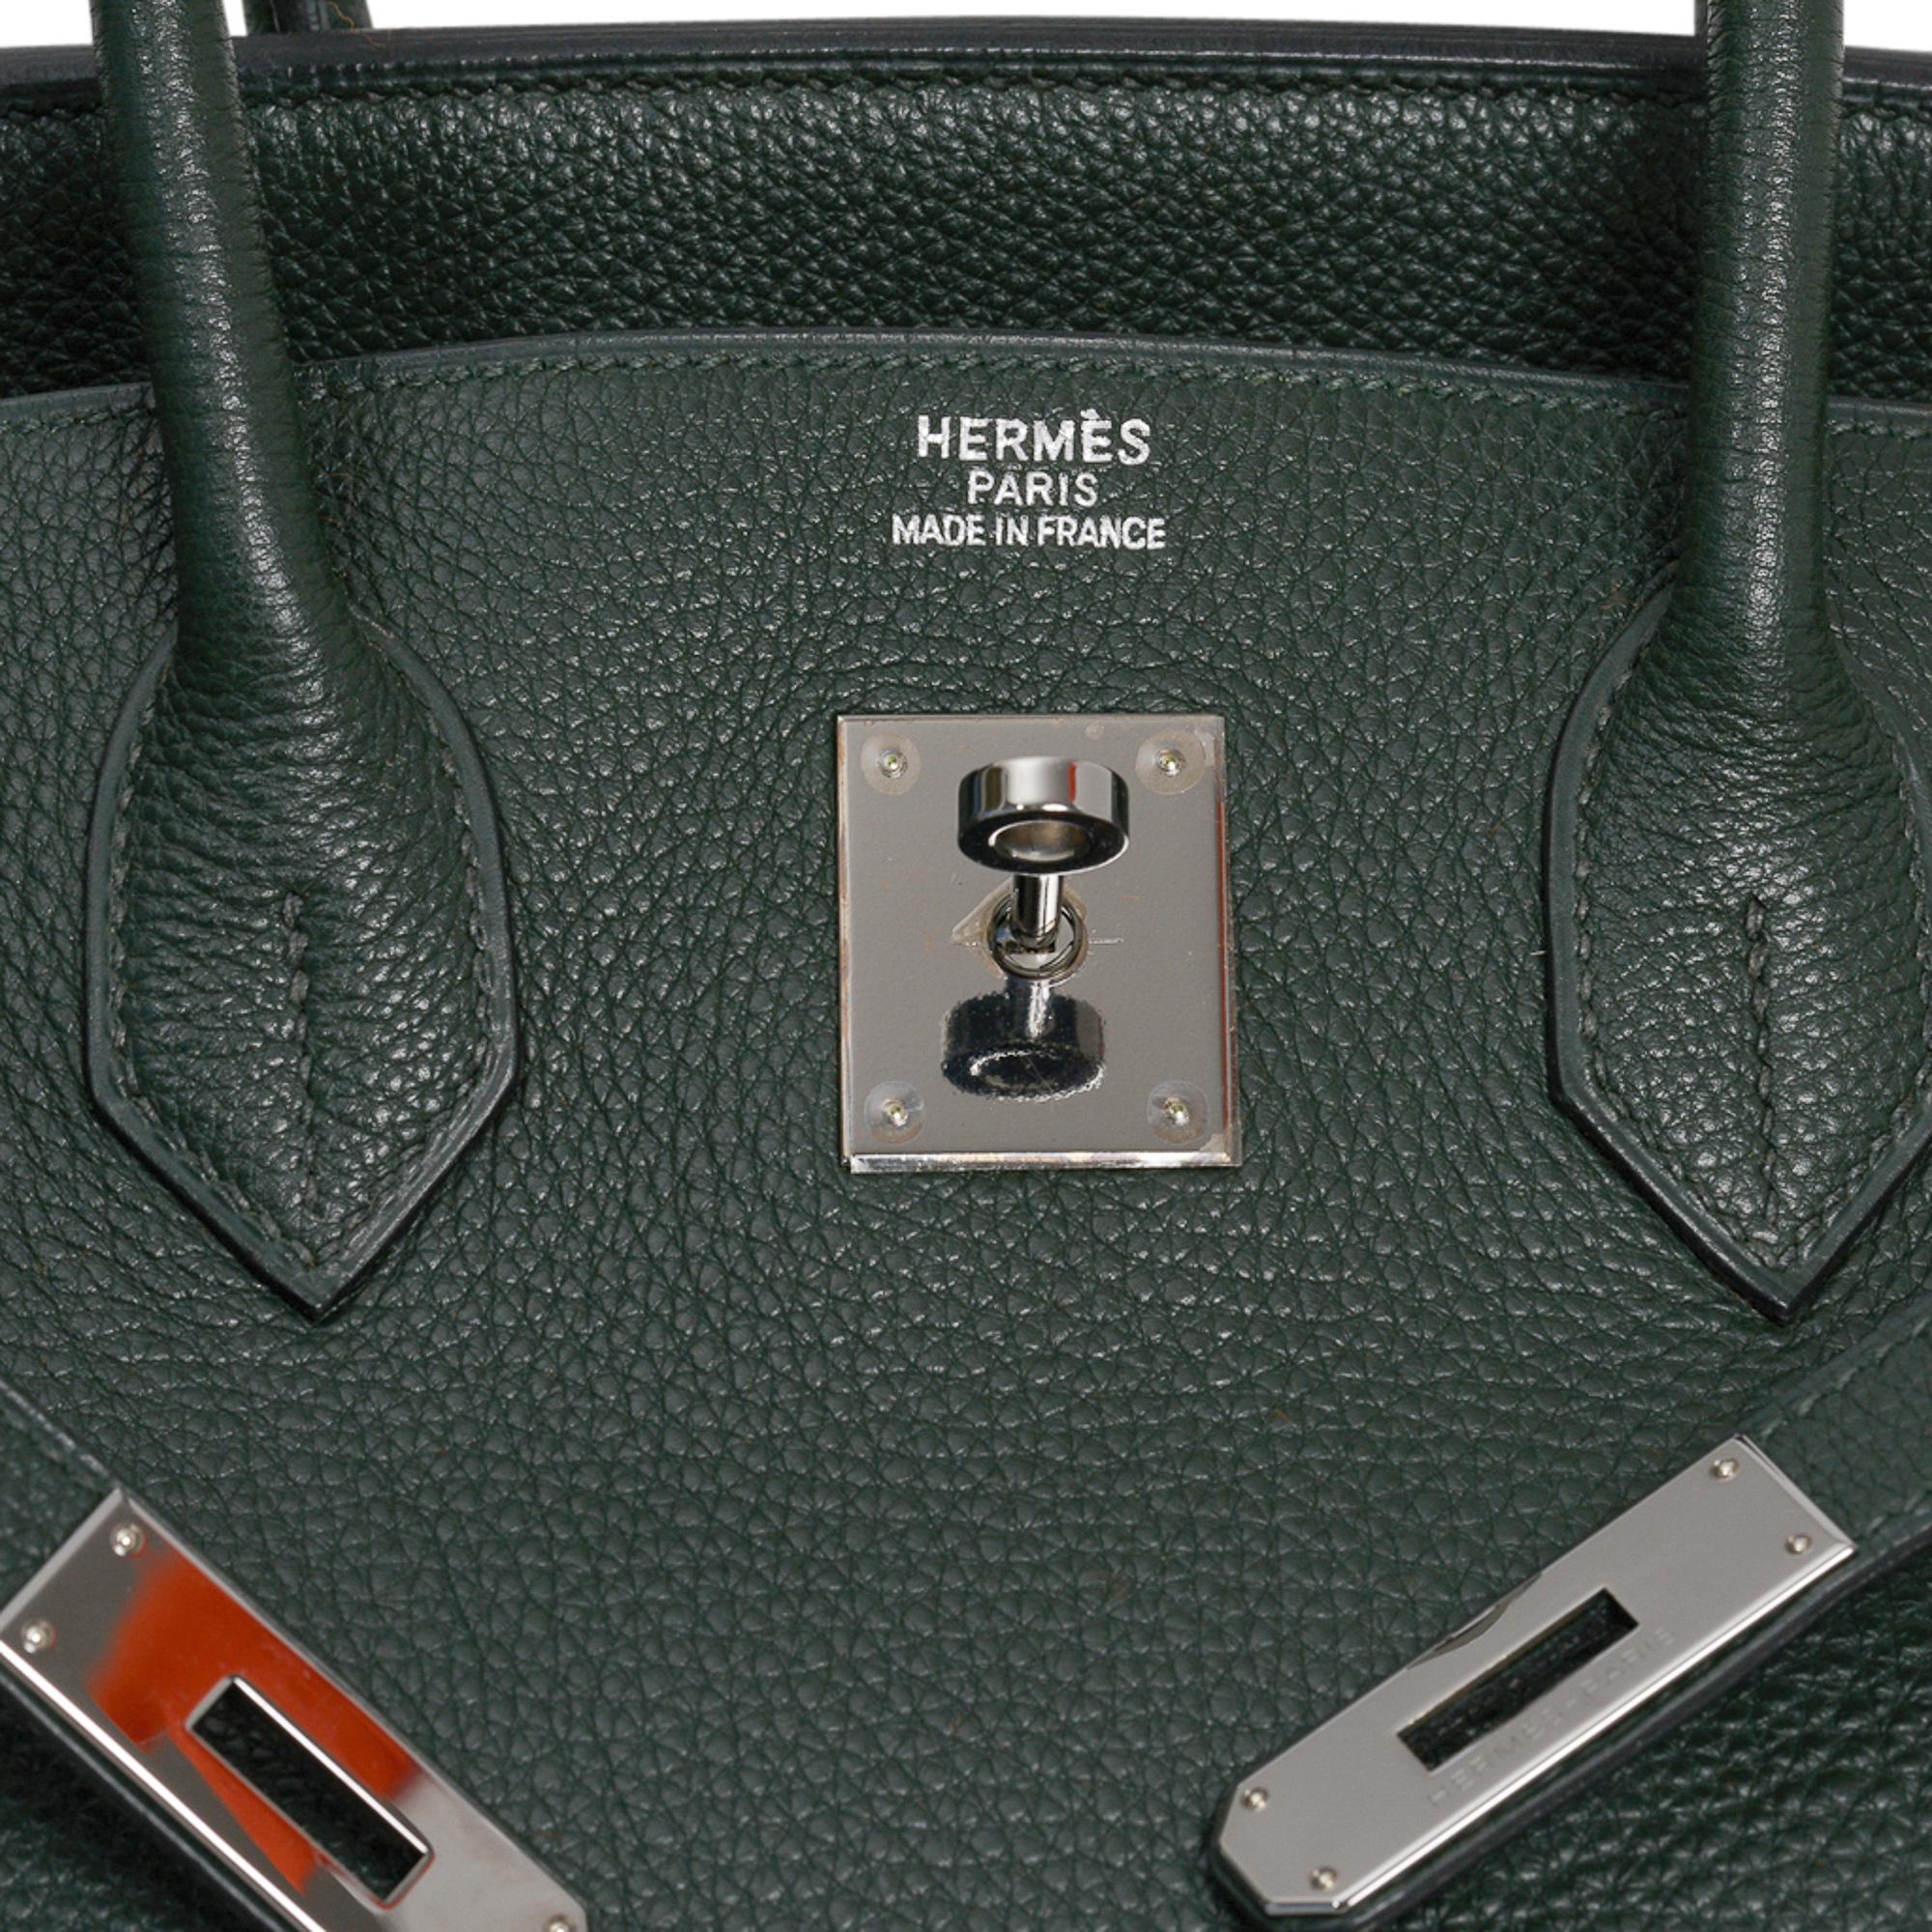 Guaranteed authentic Hermes Birkin 35 Limited Edition Vert Fonce, Vert Anis, Chartreuse bag.
Rare special order Hermes tri colour Birkin bag in Togo leather. 
Rich Vert Fonce with Vert Anis trim and Chartreuse interior. 
Rare ruthenium hardware. 
A